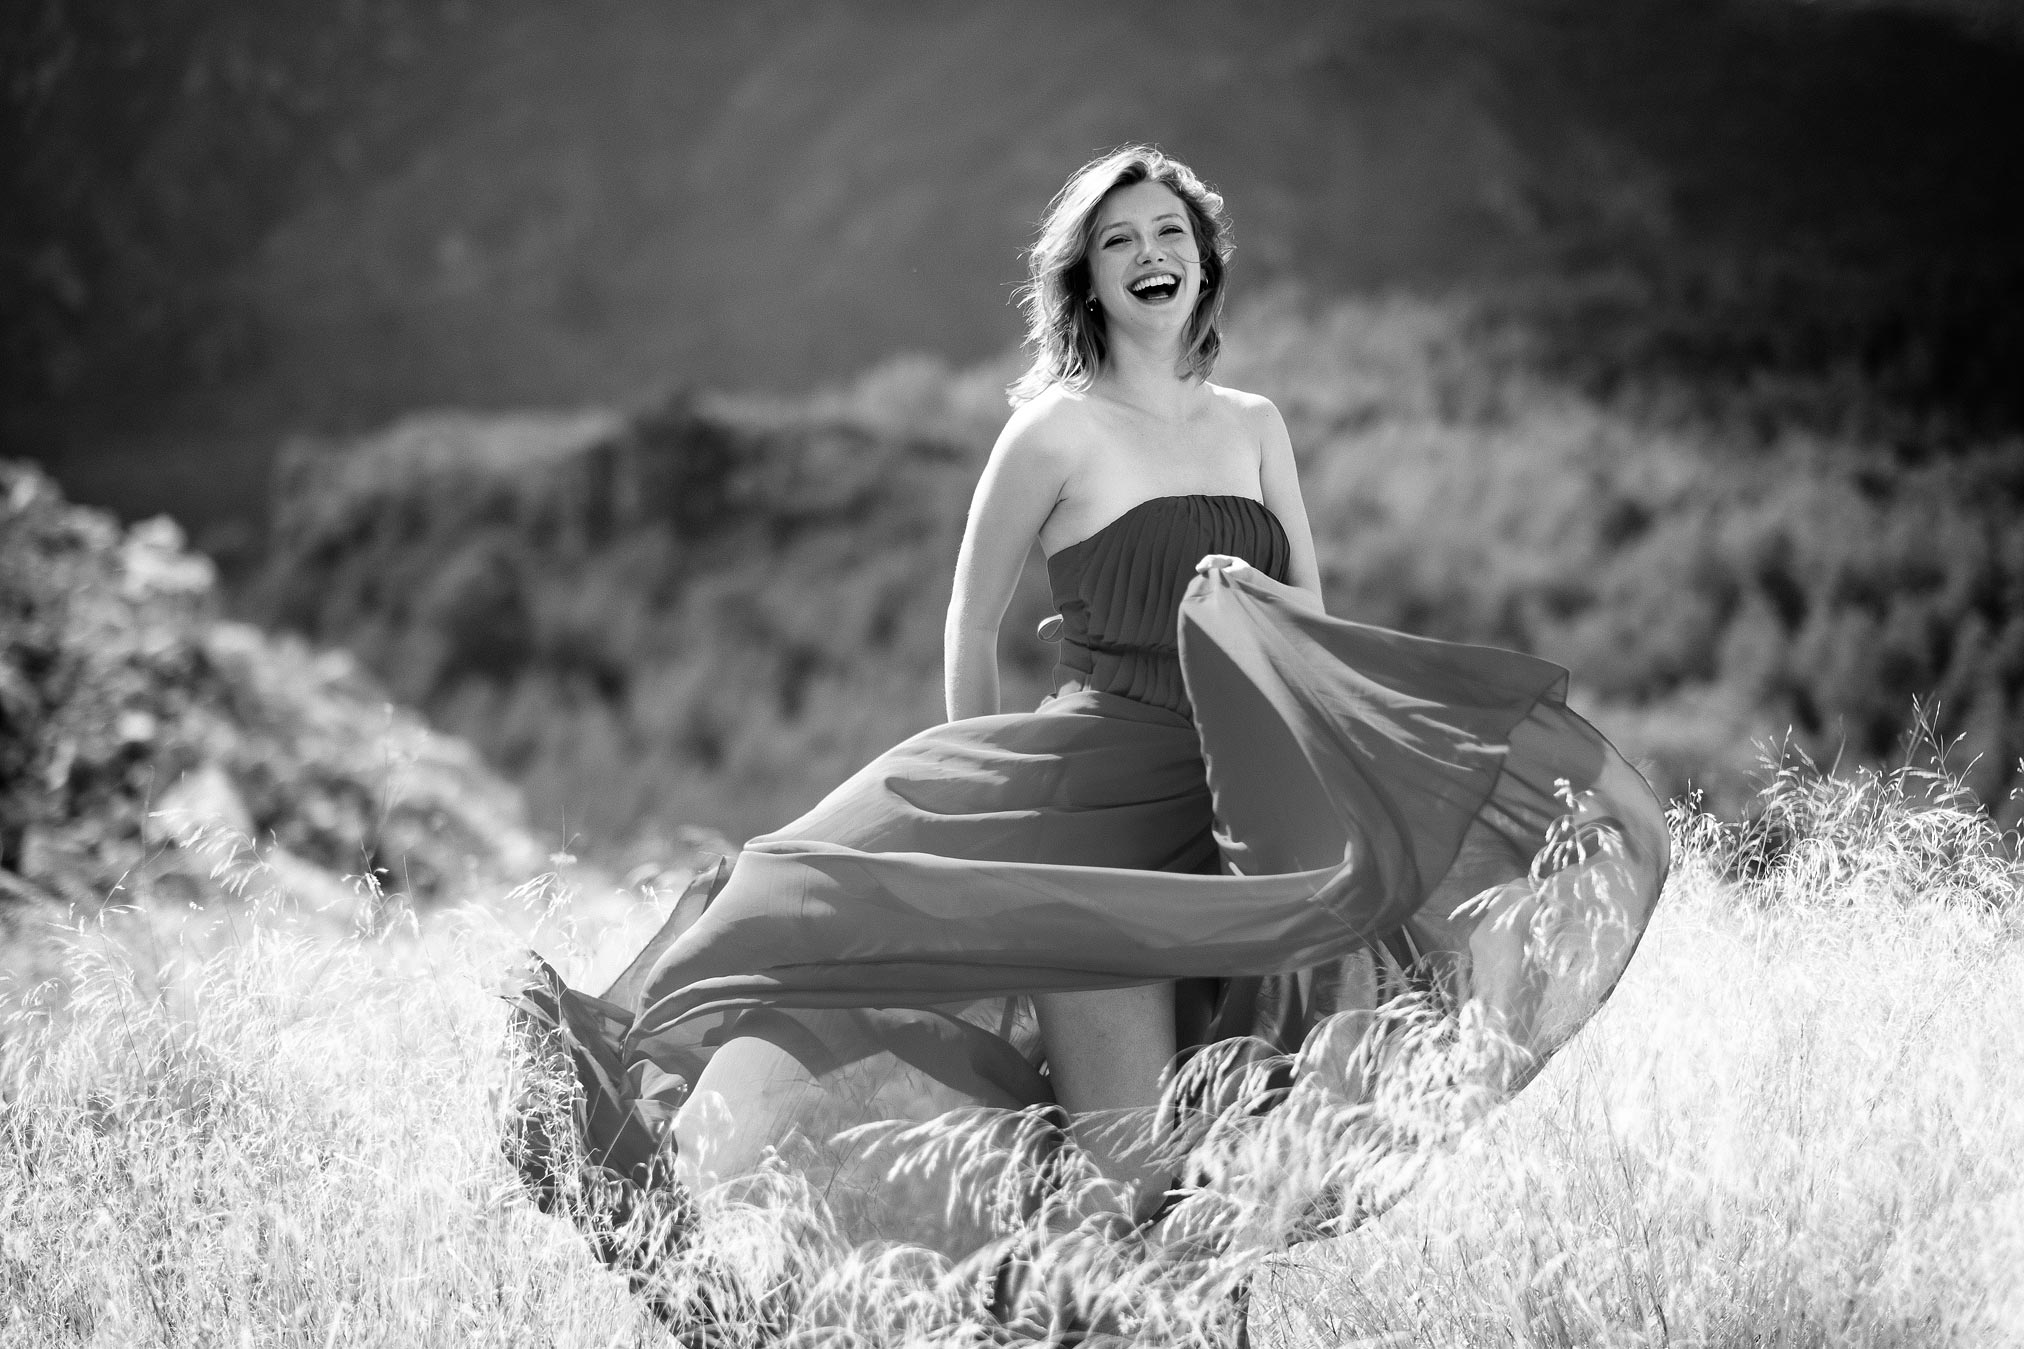 Claire Rammelkamp wafting a dress in long grass in Spain.